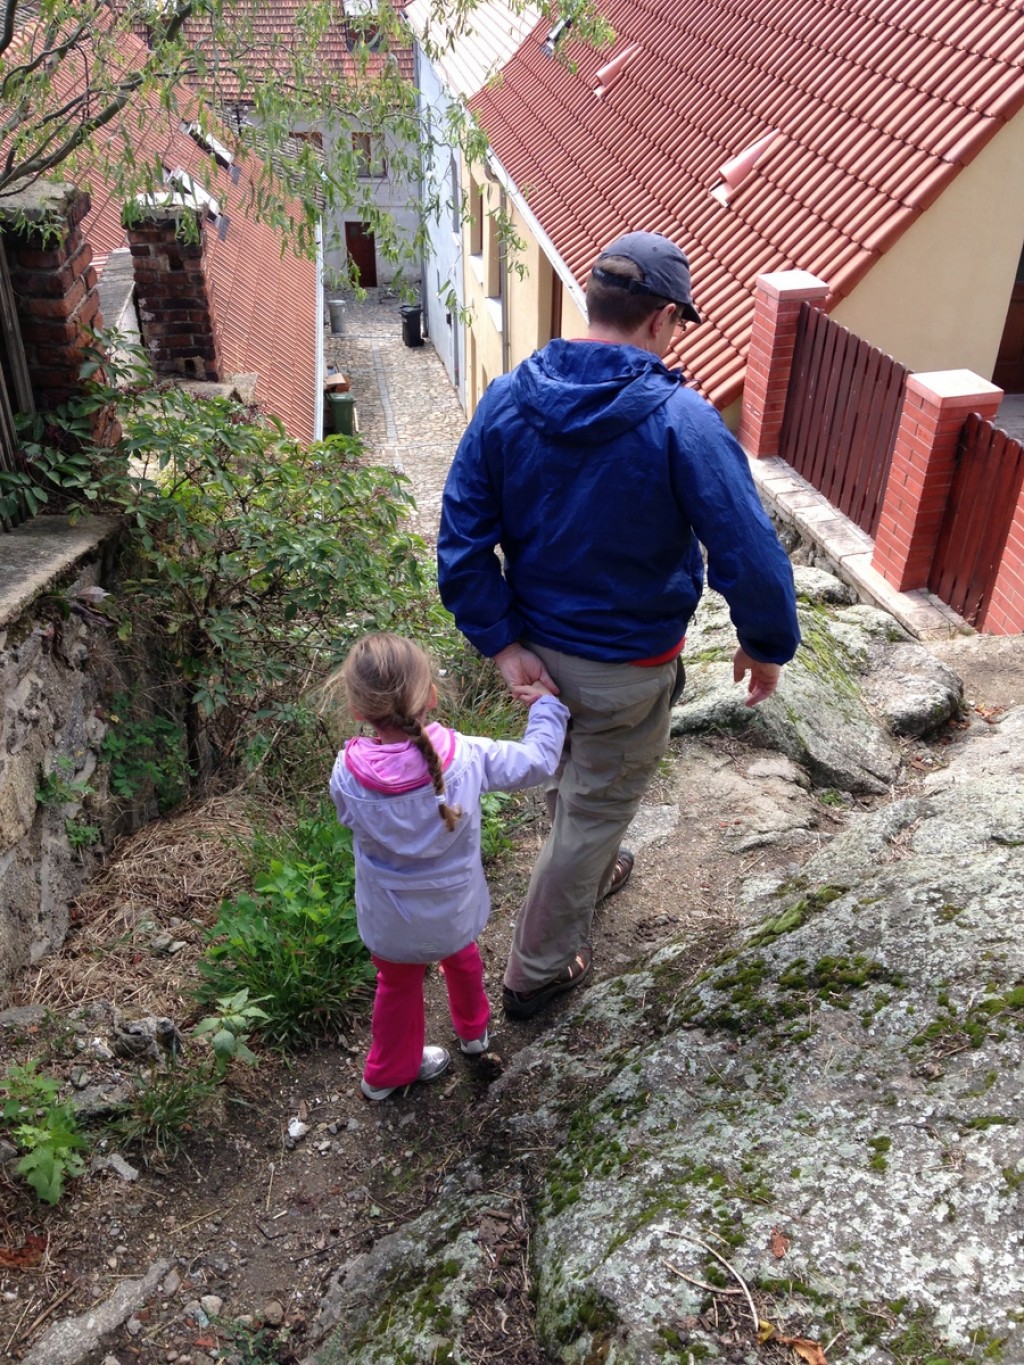 Climbing down rough paths back into the old town